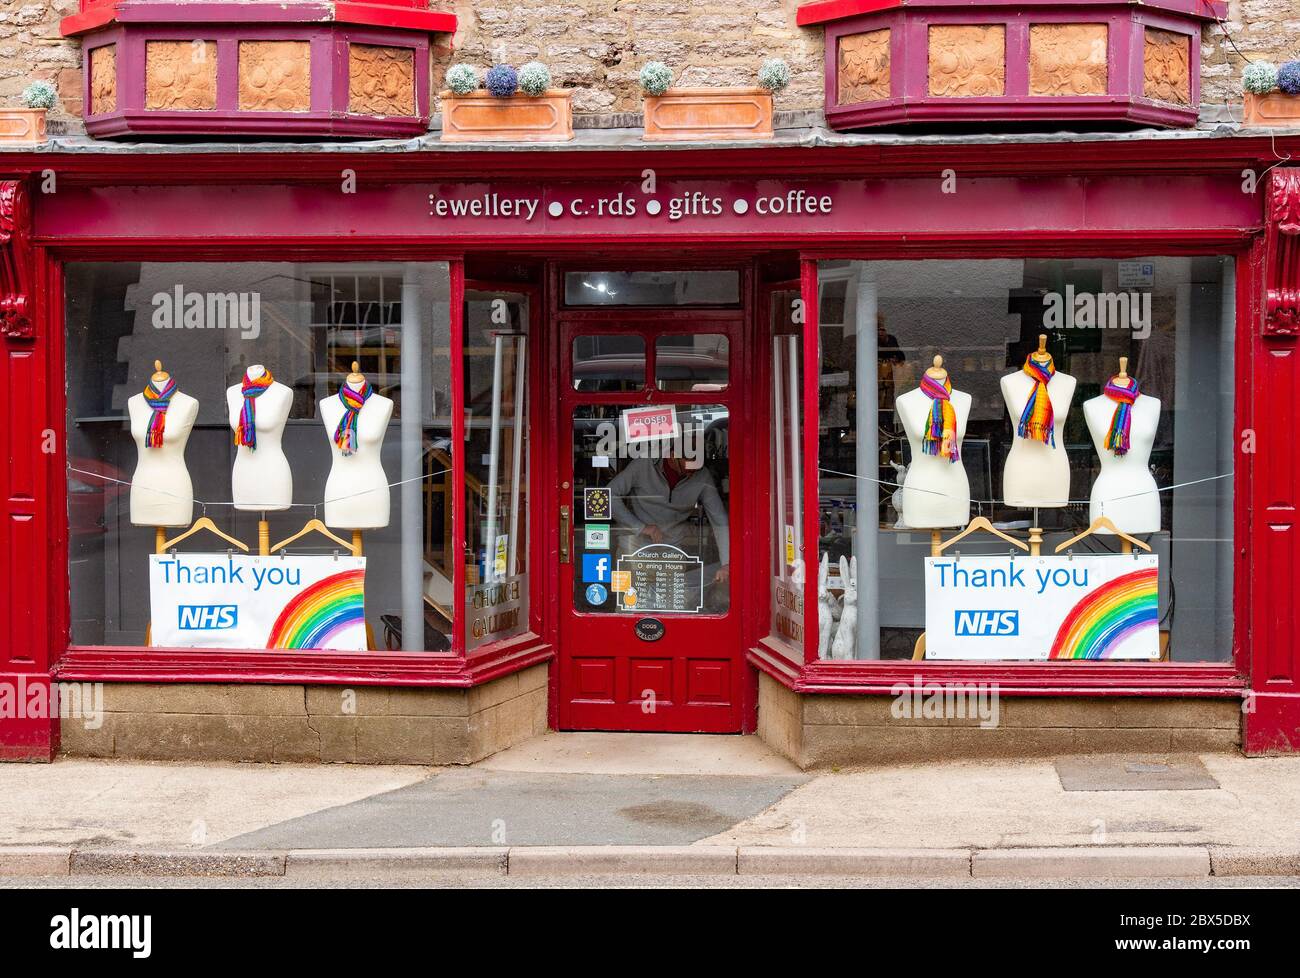 Kirkby Stephen, Cumbria, UK. 4th June, 2020. Thank You NHS displays at Church Gallery, Kirkby Stephen, Cumbria. Credit: John Eveson/Alamy Live News Stock Photo